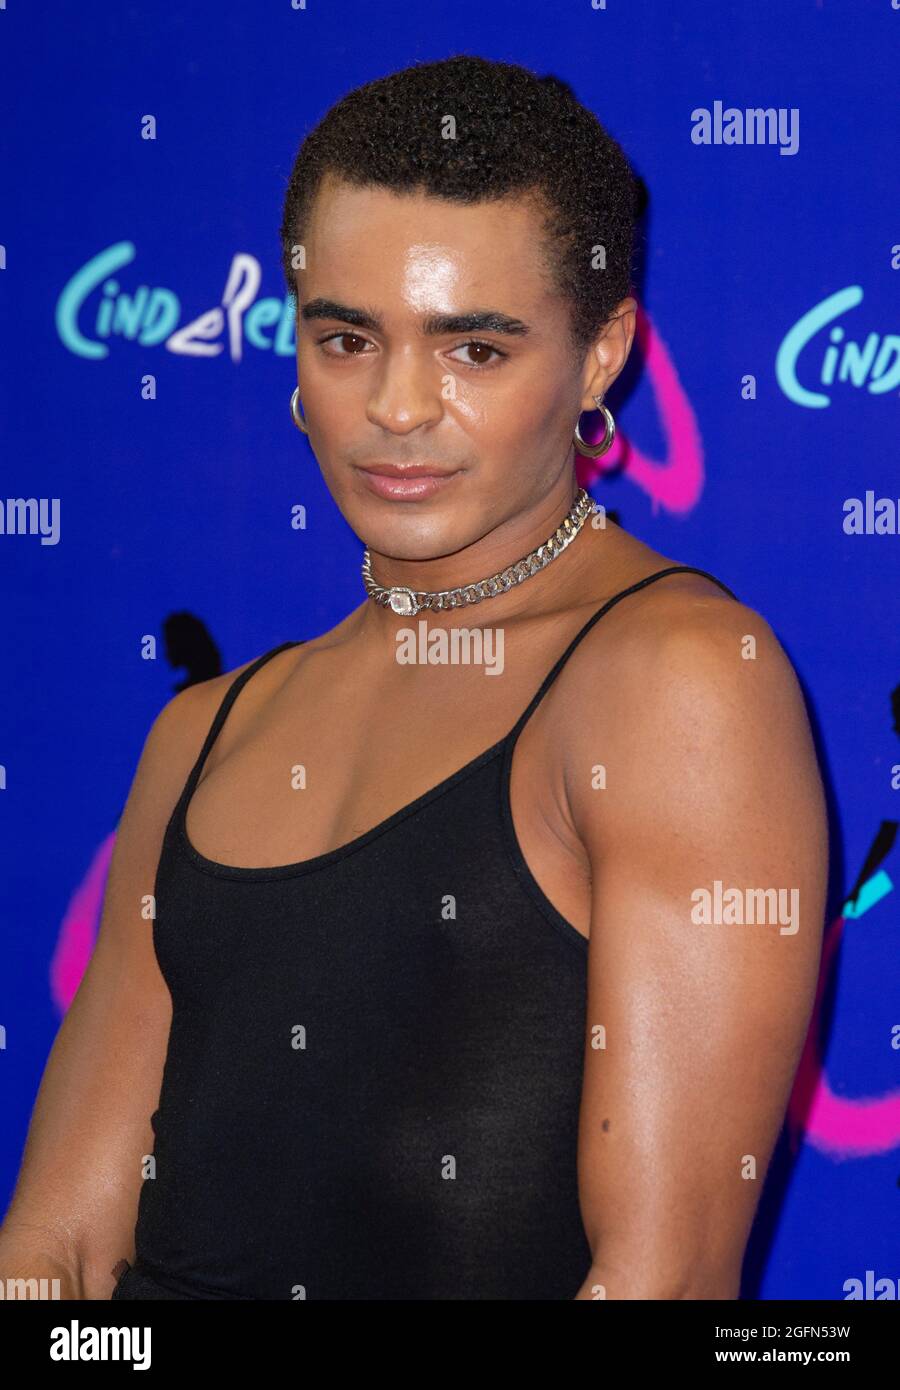 LONDON, ENGLAND - AUGUST 25: Layton Williams attends Andrew Lloyd Webber's 'Cinderella' at the Gillian Lynne Theatre on August 25, 2021 in London, Eng Stock Photo